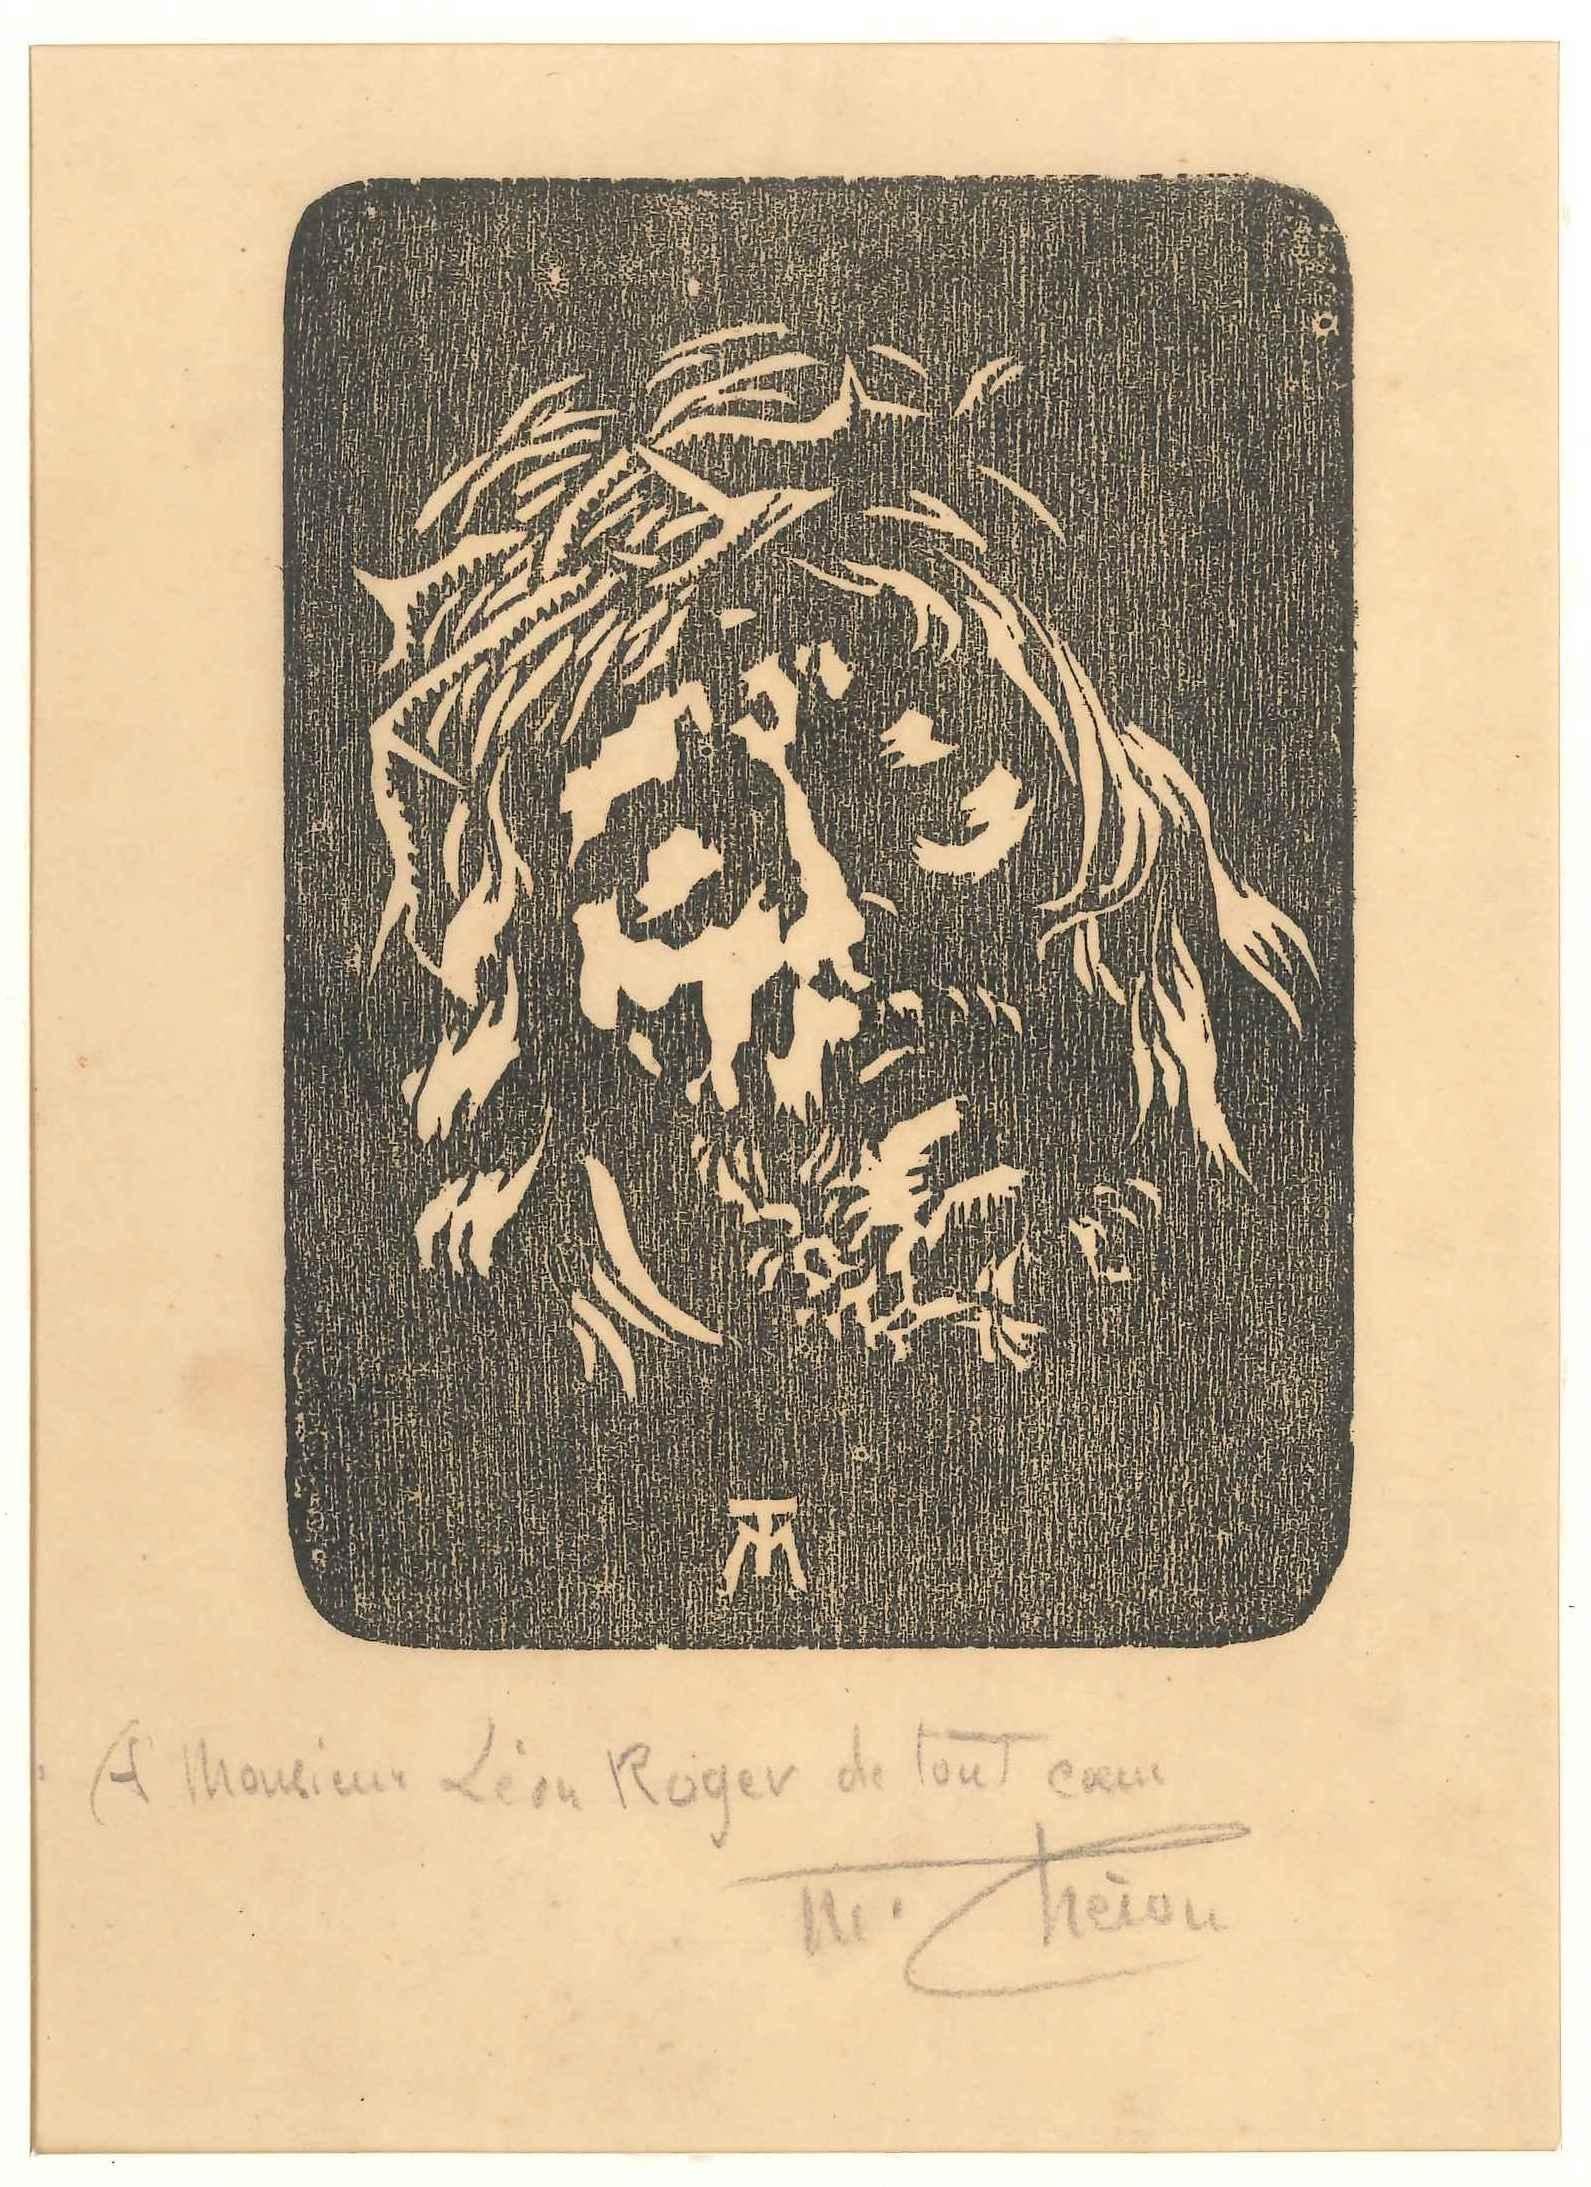 Portrait of Jesus is an original artwork realized by Max Théron in the first years of the 20th Century. Woodcut print on paper. 

Hand-signed in pencil by the artist on the lower margin. Dedicated on the lower margin "A monsieur Lèon Roger de tout